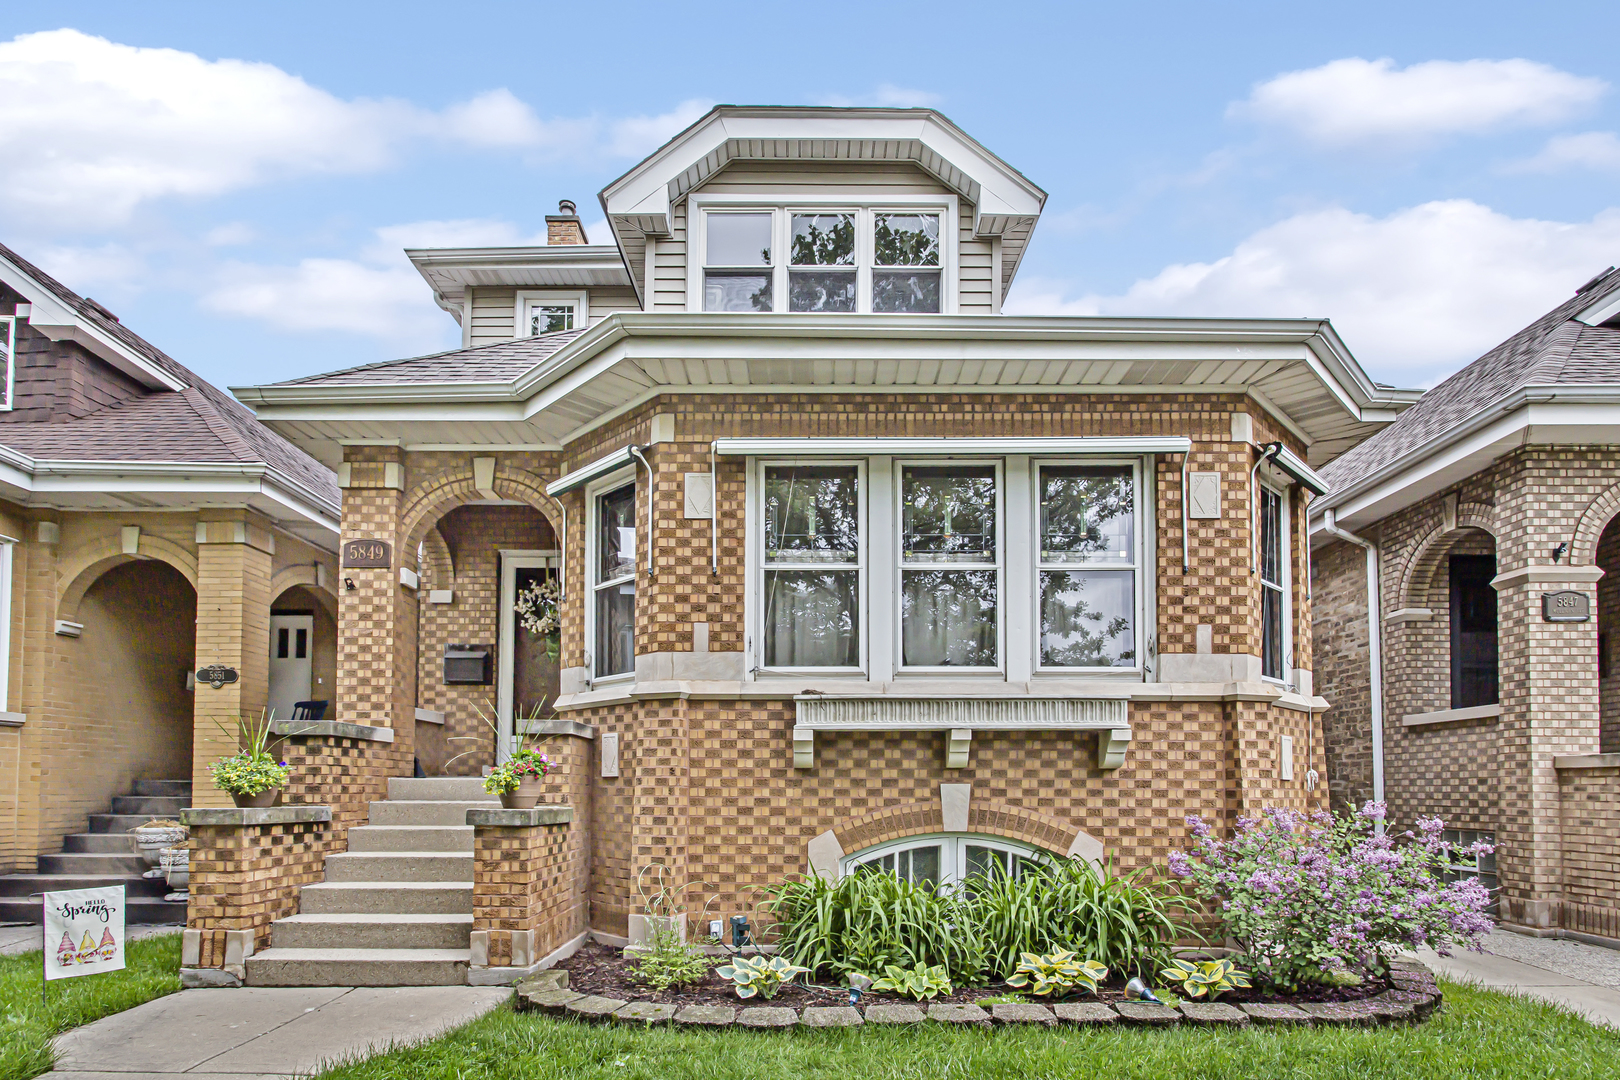 5 House in Norwood Park